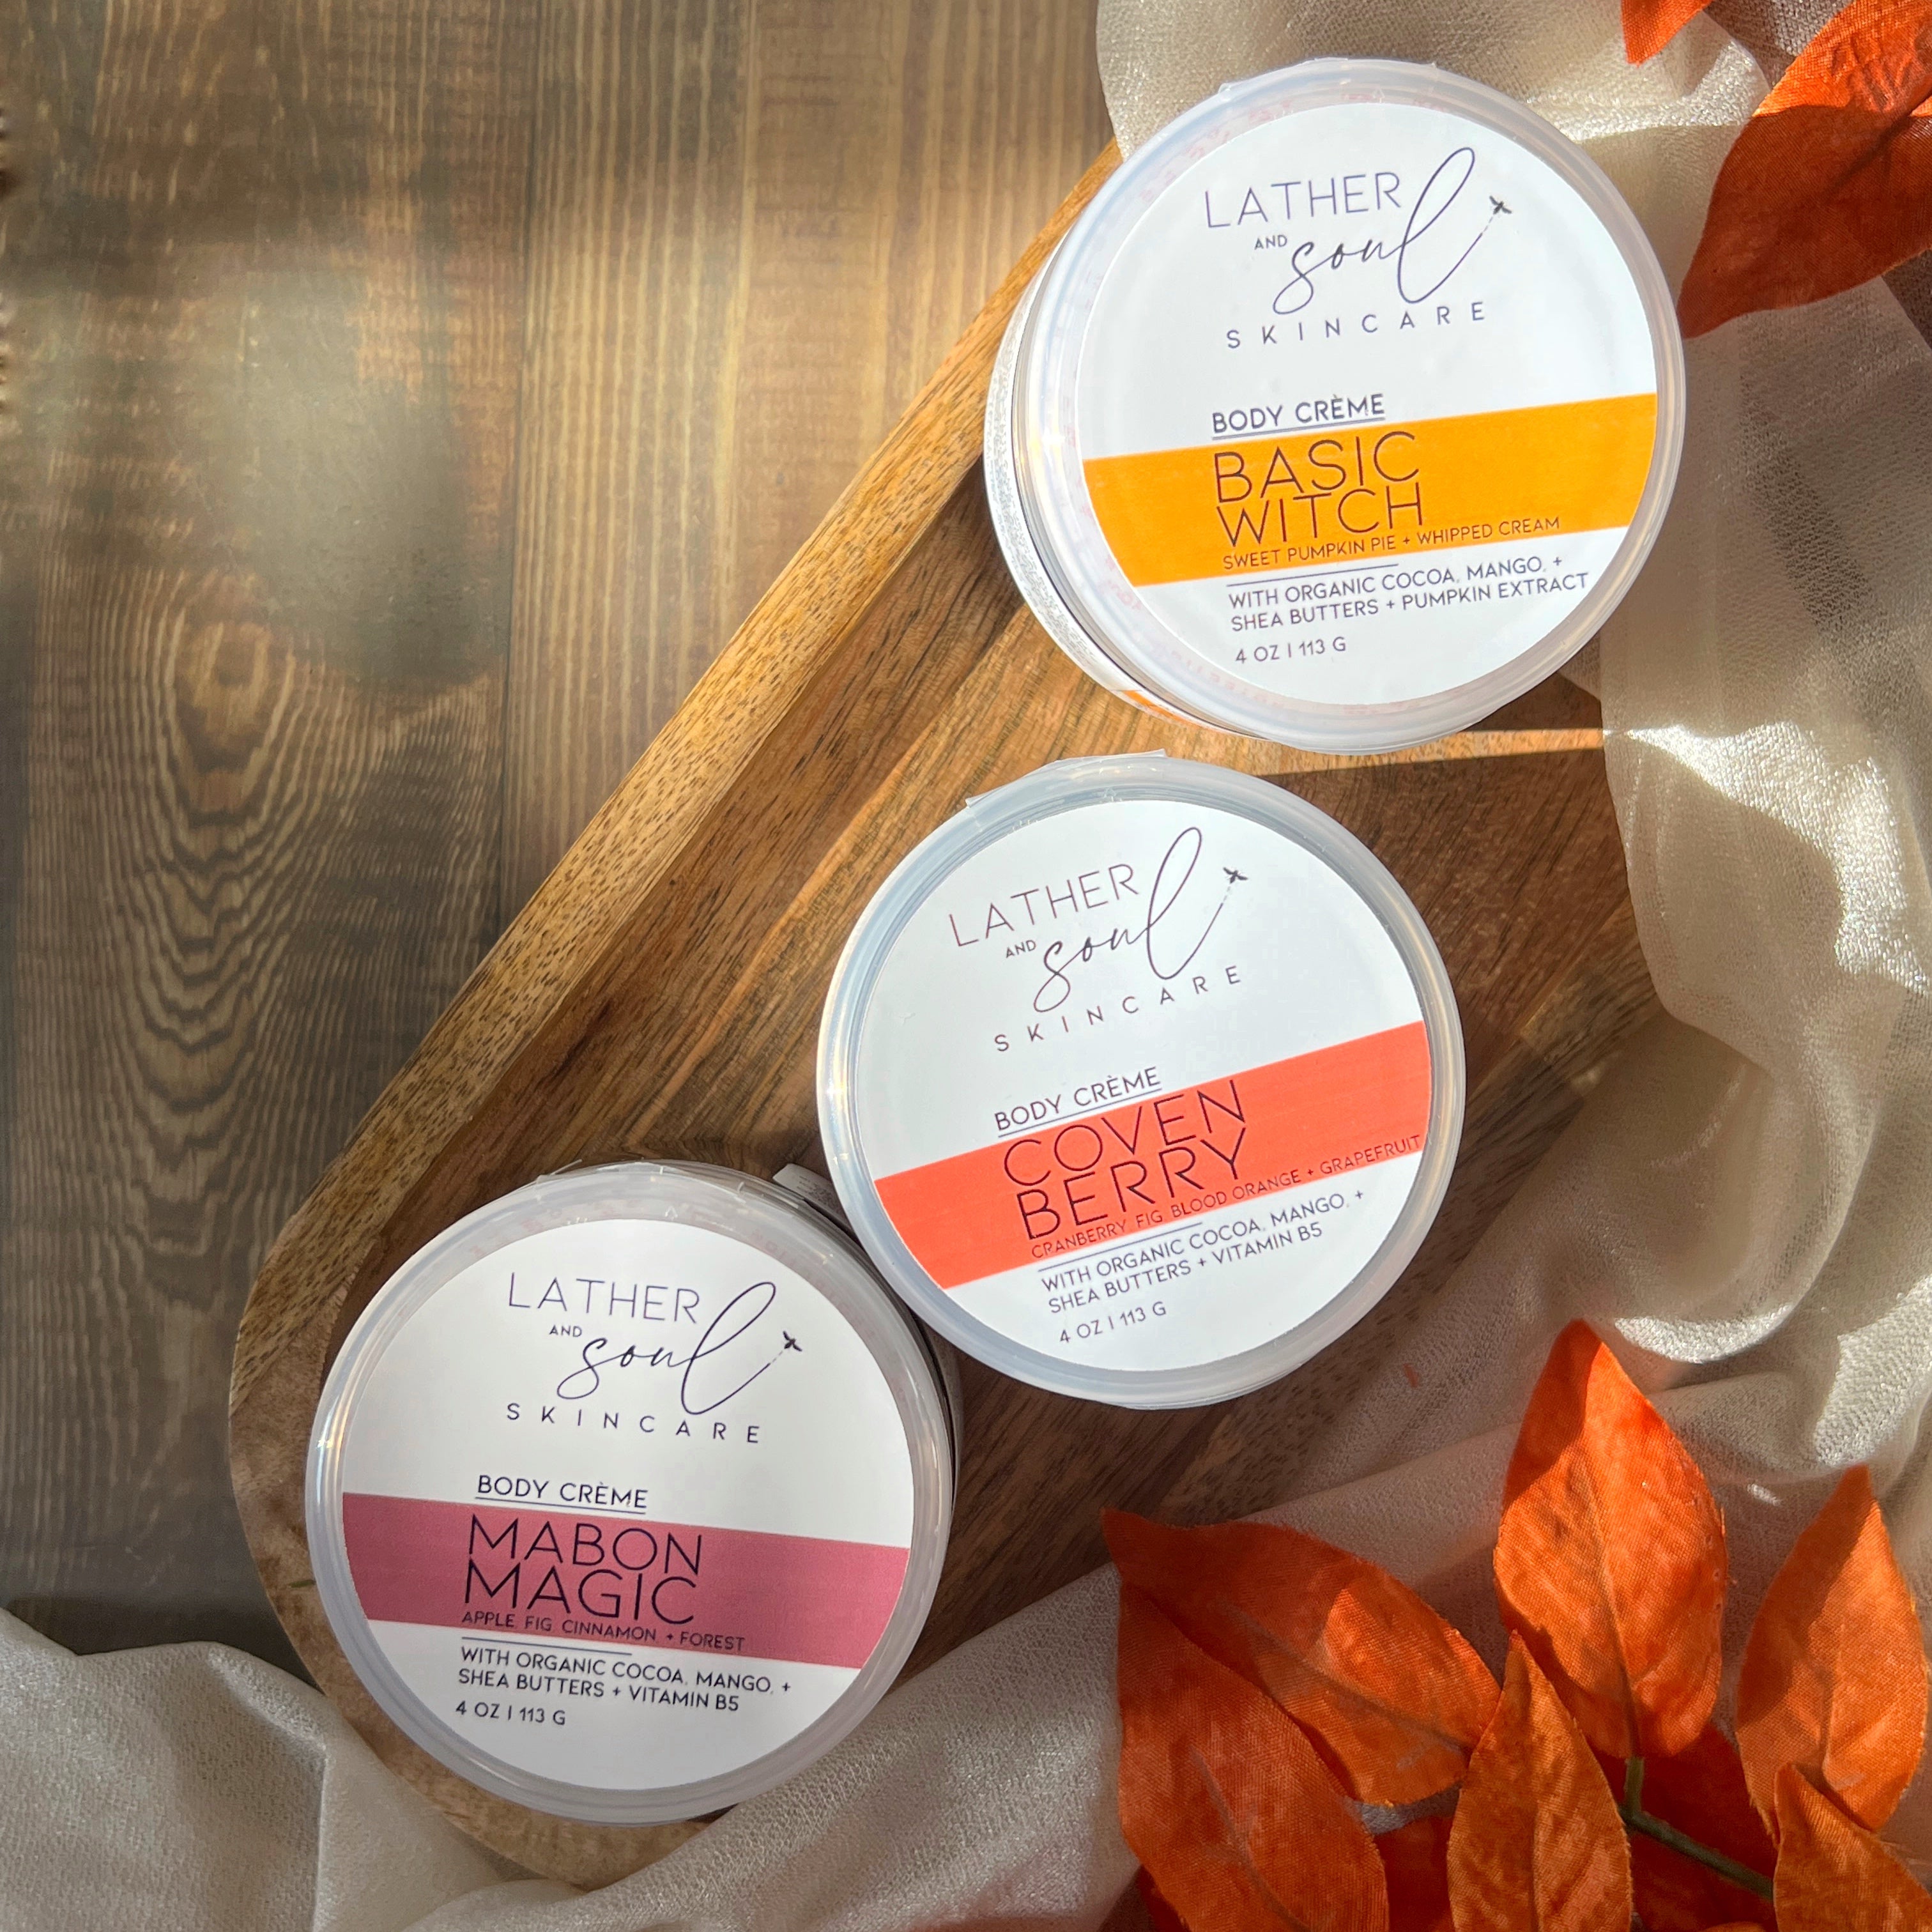 The Fall Collection of body crèmes from Lather and Soul, made with organic ingredients